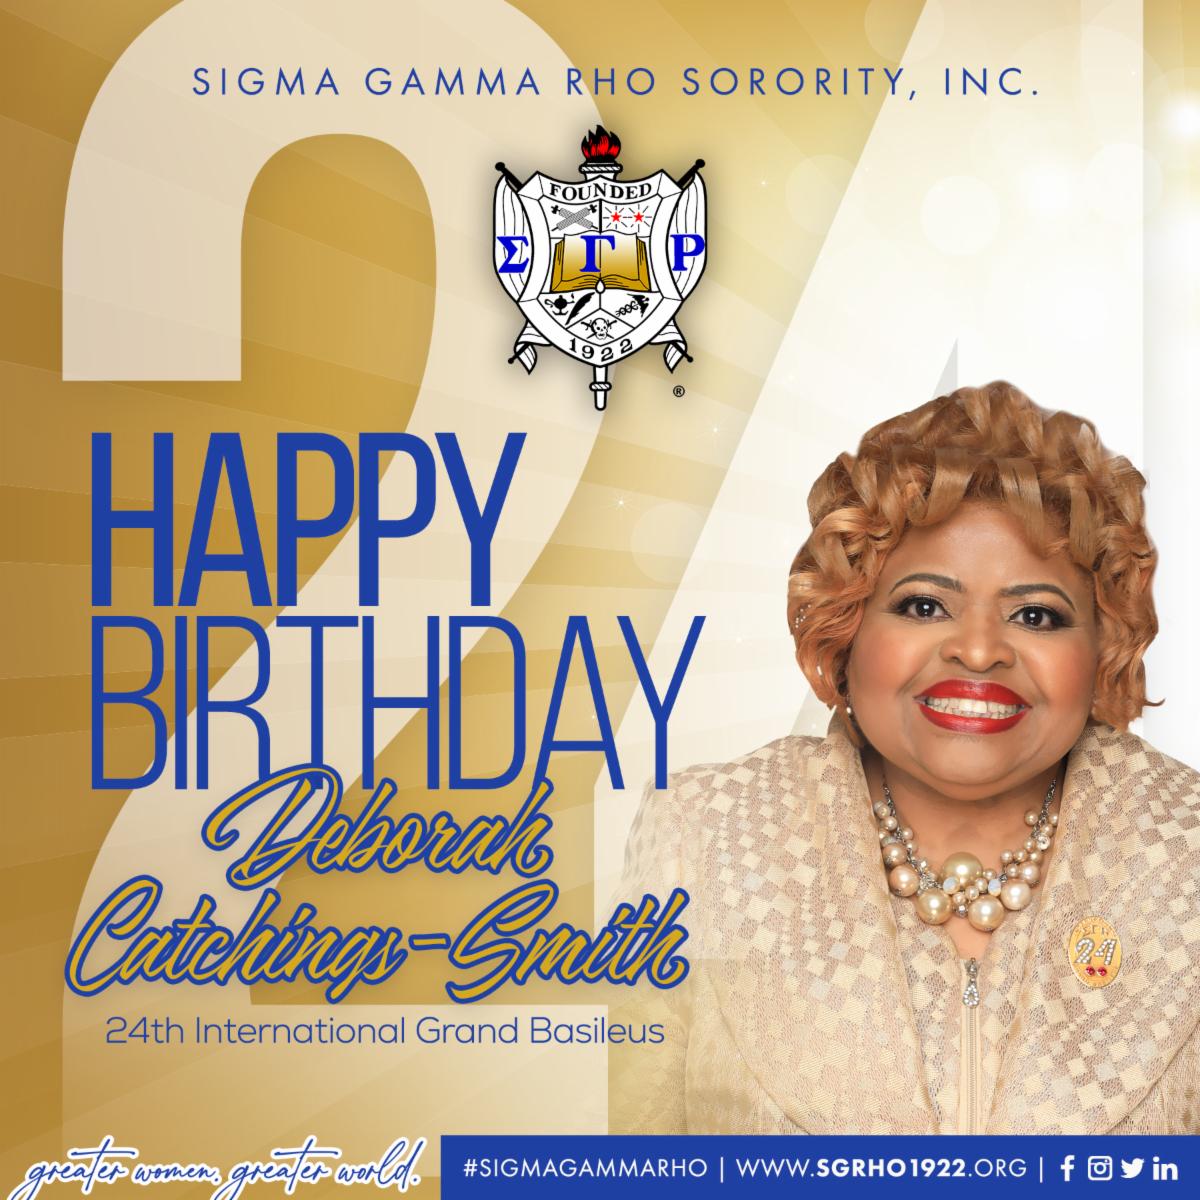 Happy Birthday to 24th International Grand Basileus Deborah Catchings-Smith!

Send birthday wishes below in the comments! 

#SigmaGammaRho #Birthdays #Leadership #Greater